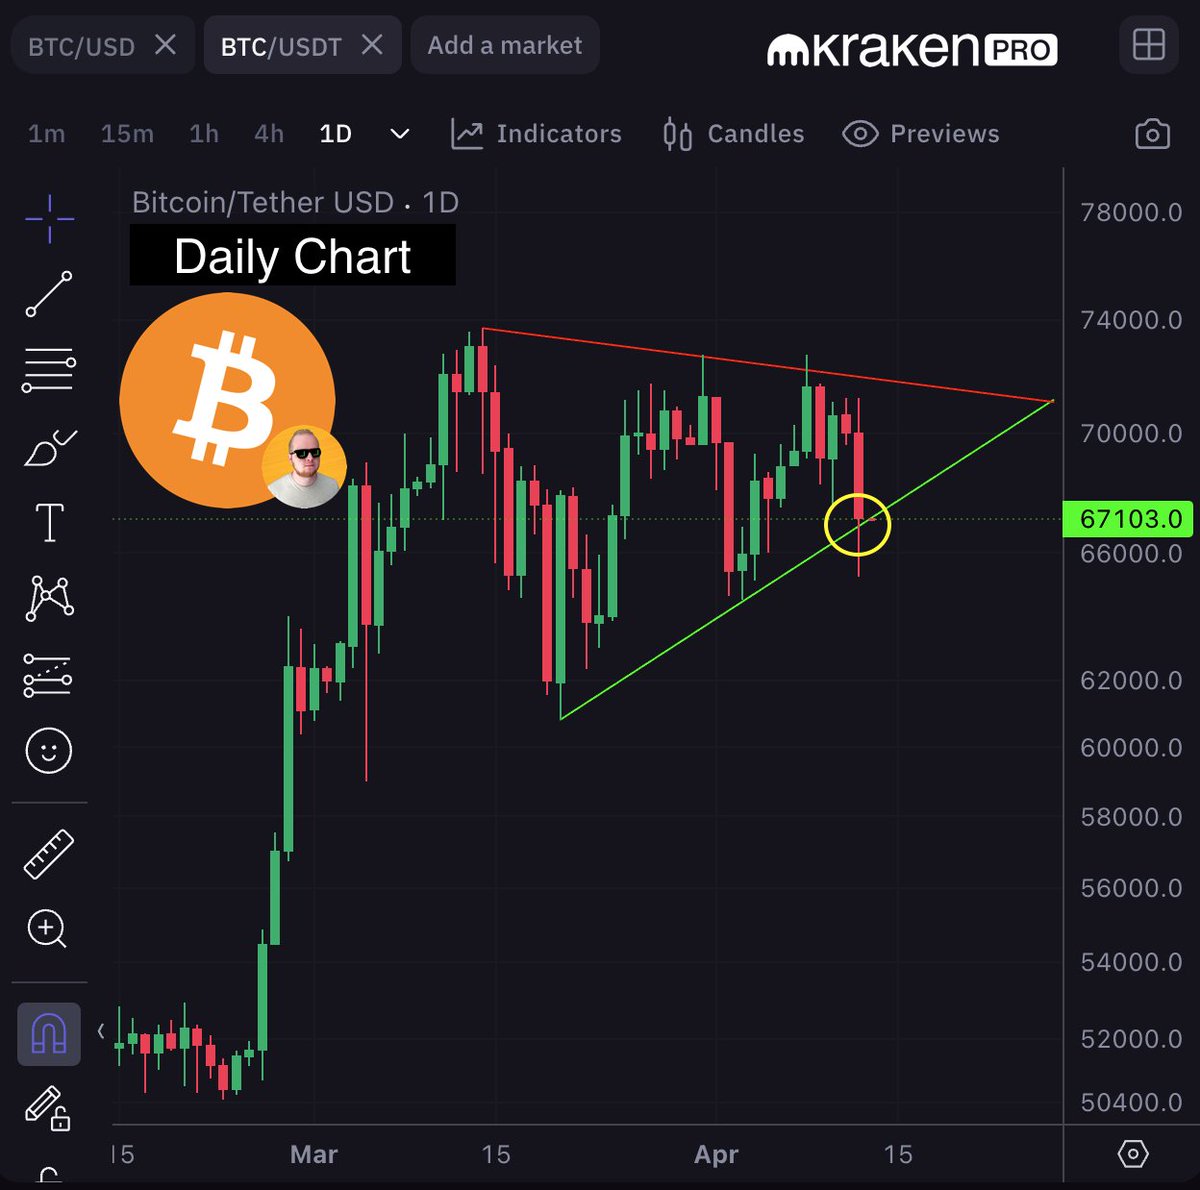 #Bitcoin Bulls successfully defended todays Daily candle close. #BTC managed to close the Daily just above the support line. $BTC 🔗kraken.pxf.io/AW2gBJ